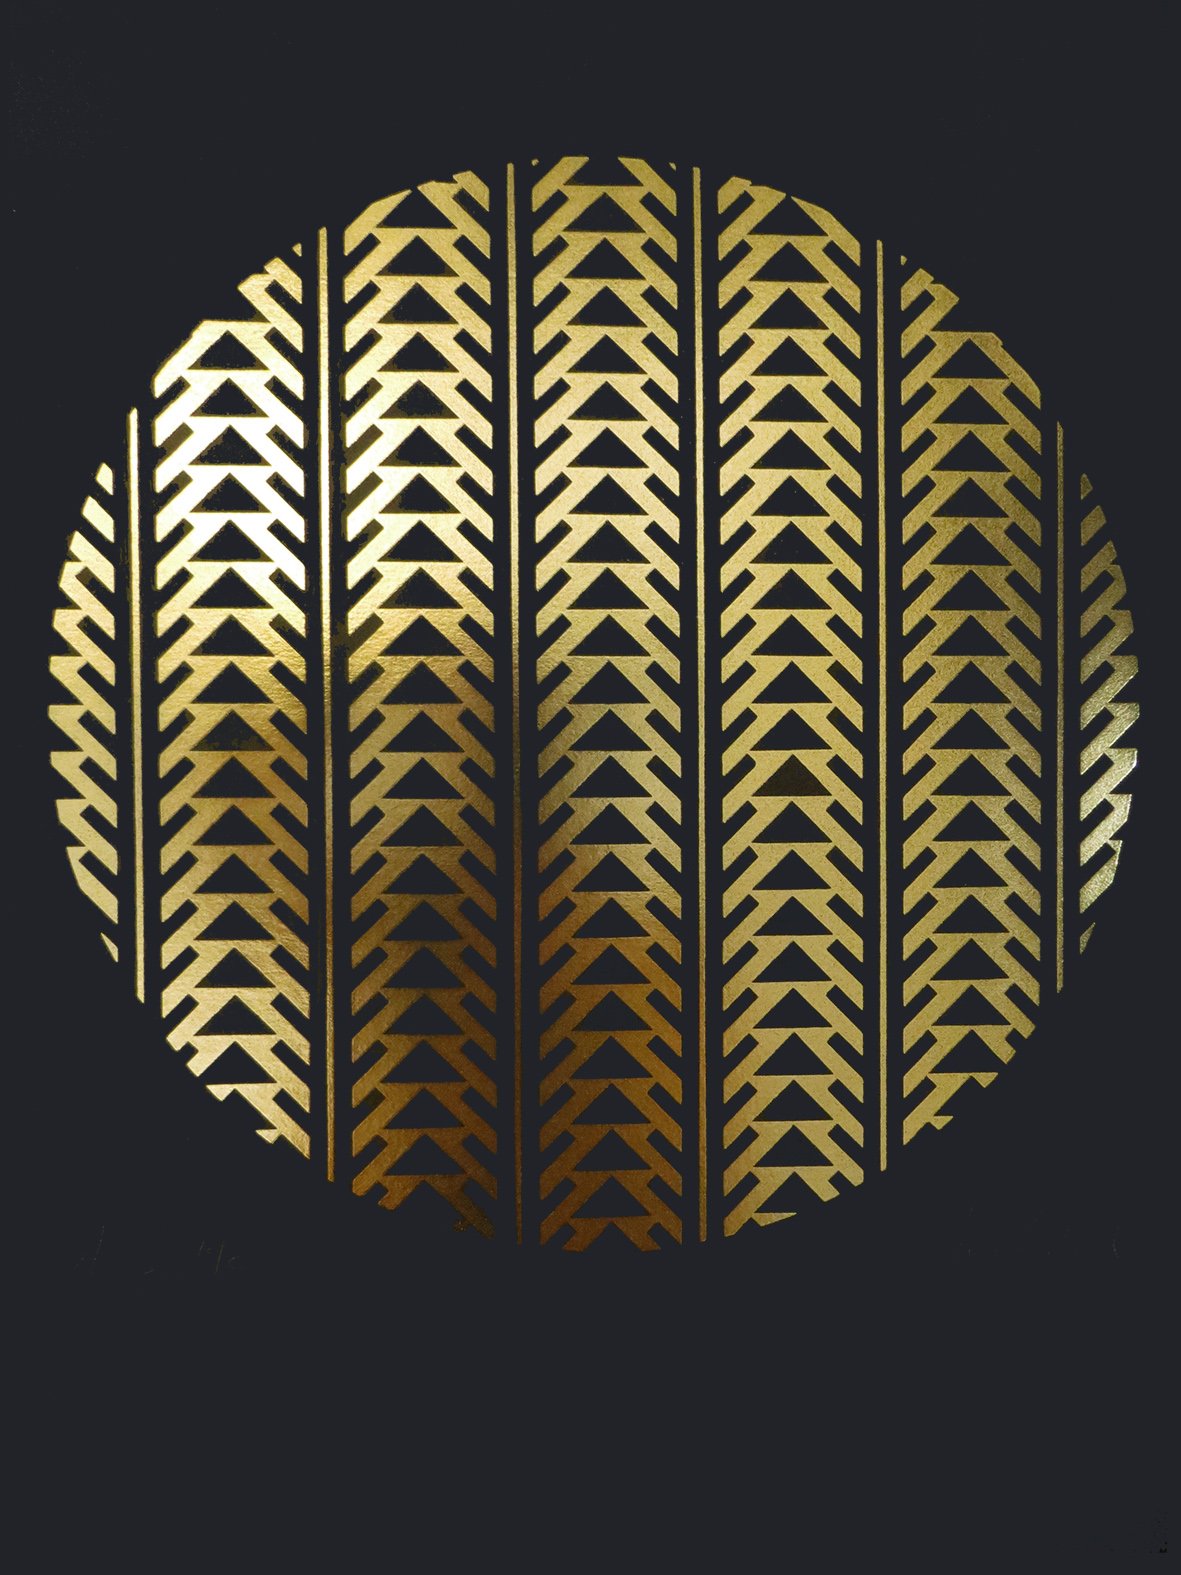 Image of 'Ascension' Limited Edition Gold foil screenprint